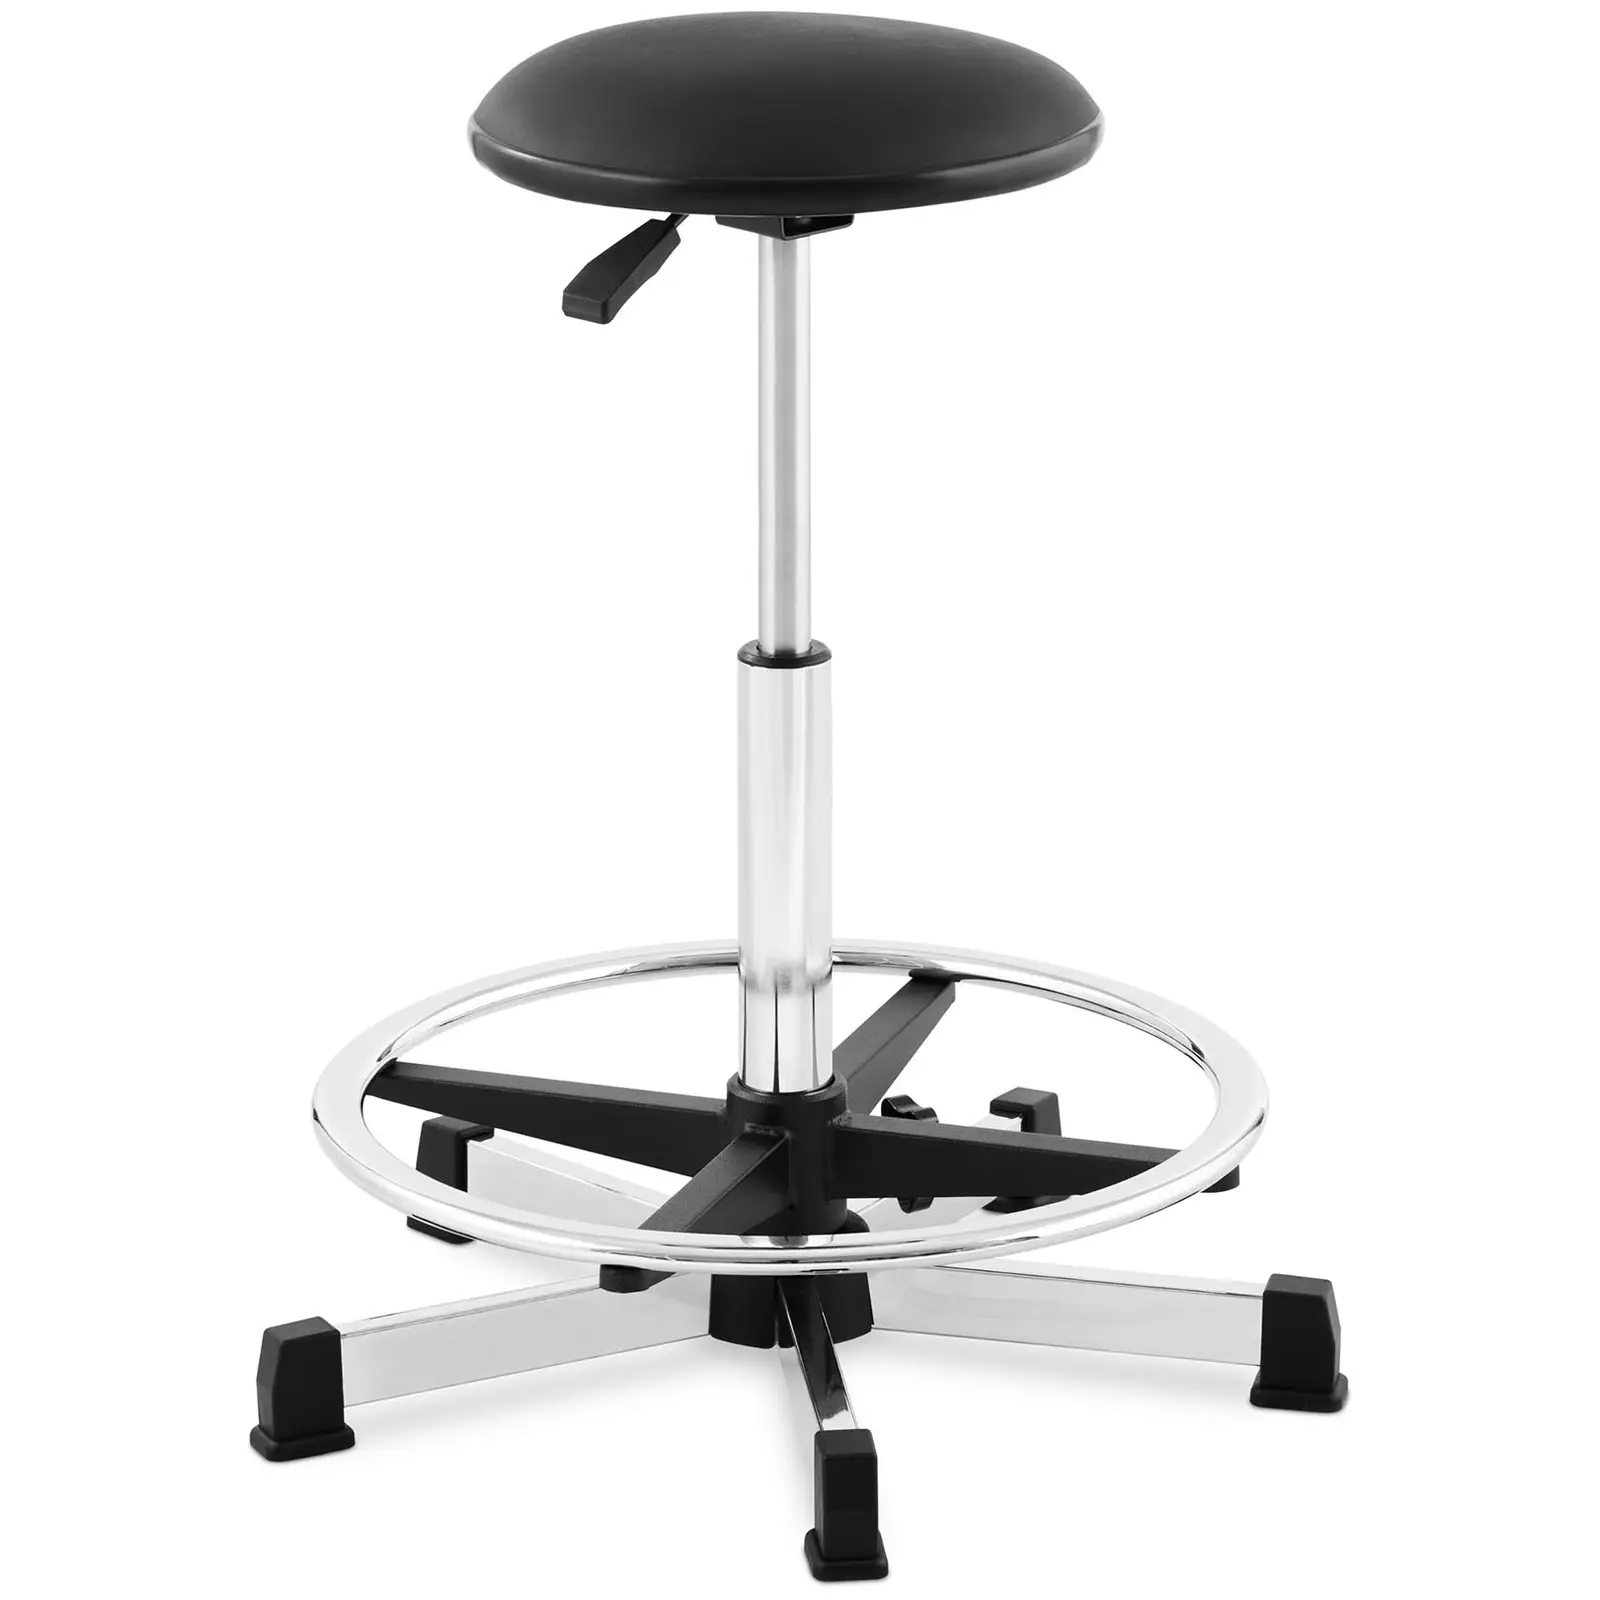 Factory second Swivel stool - 120 kg - Black - foot ring - height adjustable from 530 - 800 mm